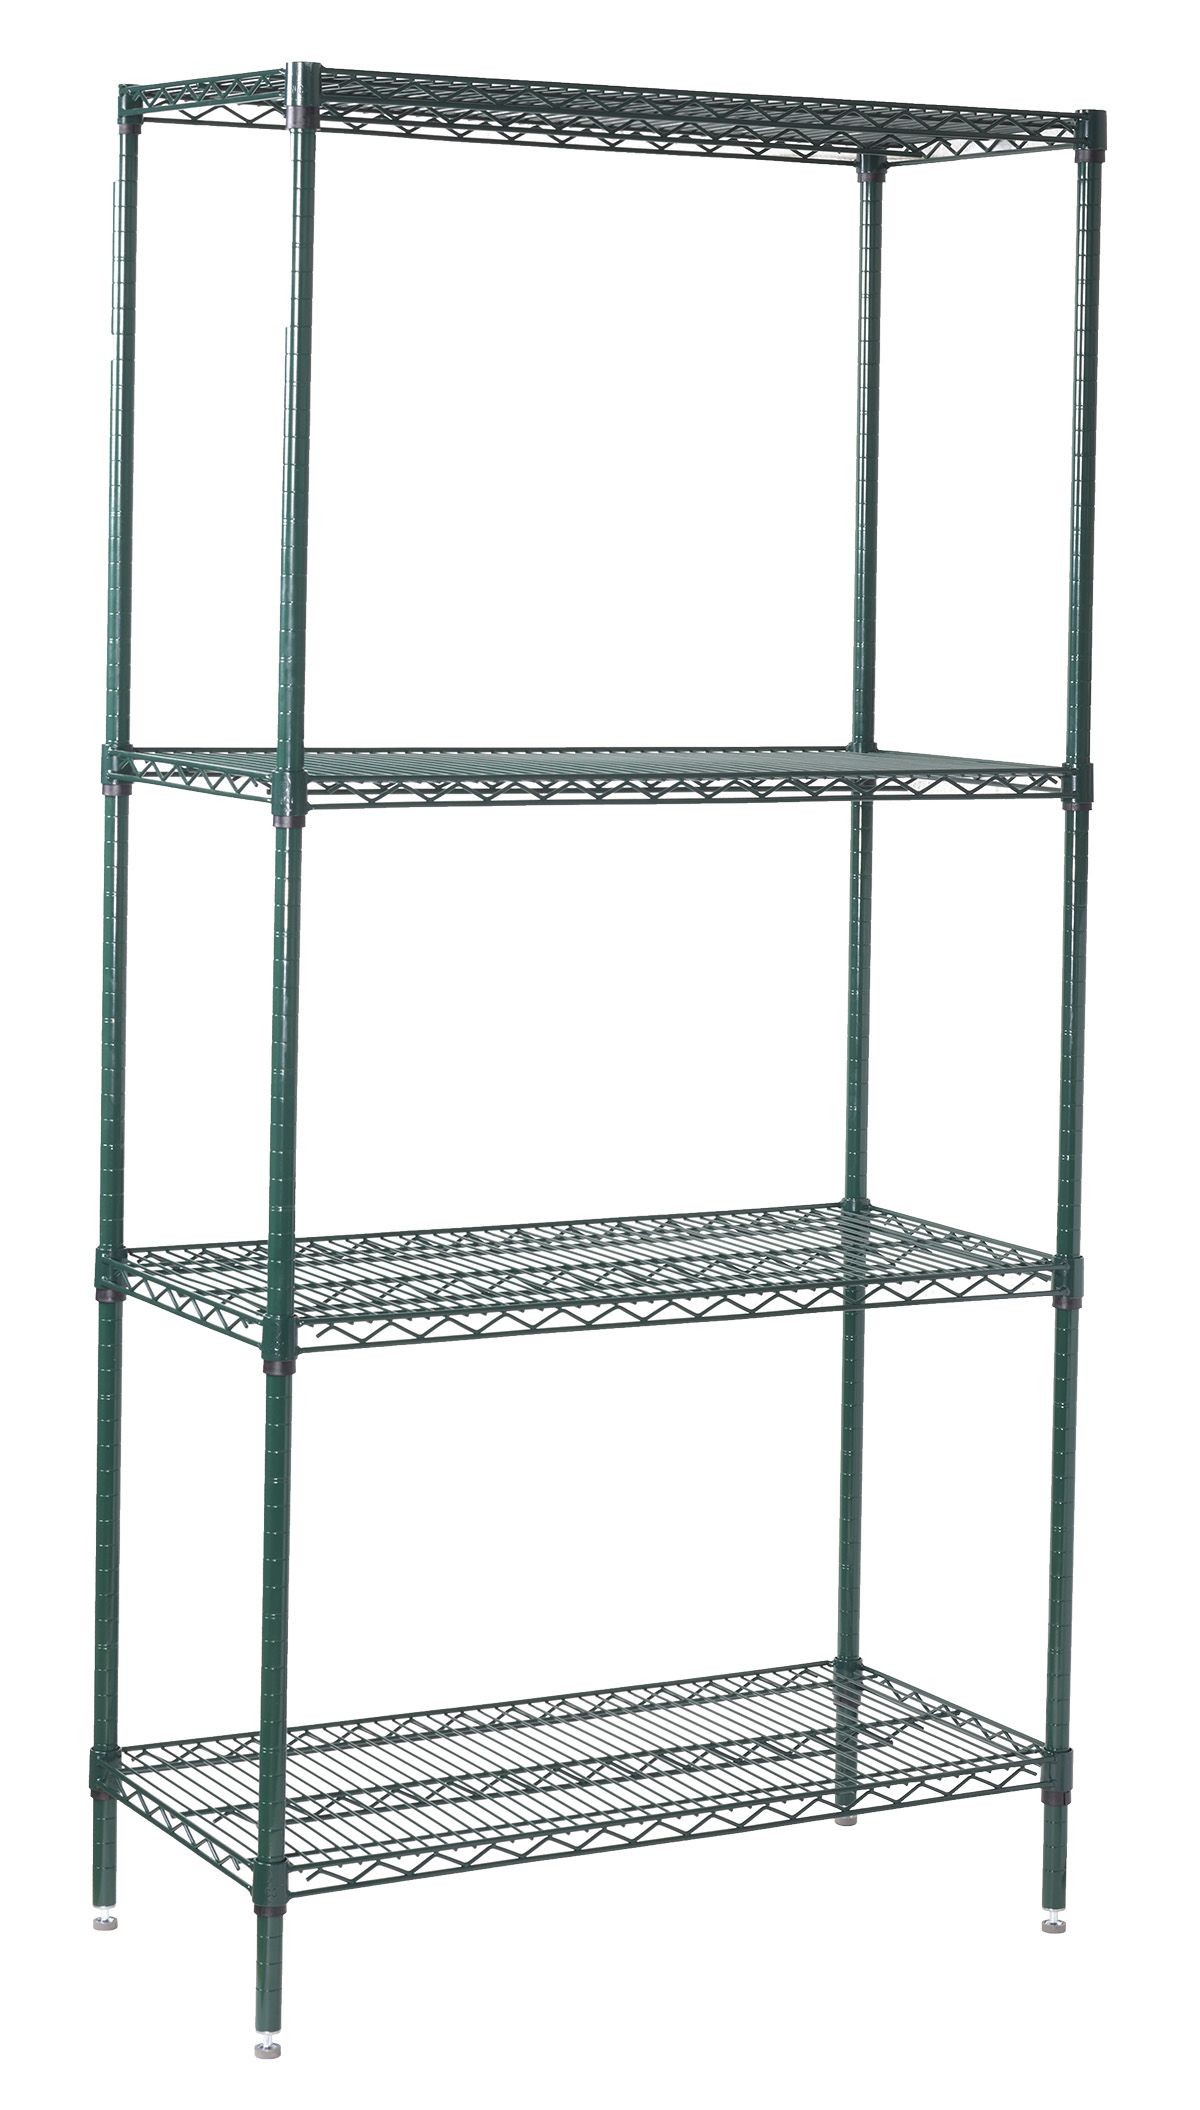 Winco VEXS-1836 Epoxy Coated 4-Tier Wire Shelving Set, 18" x 36" x 72"